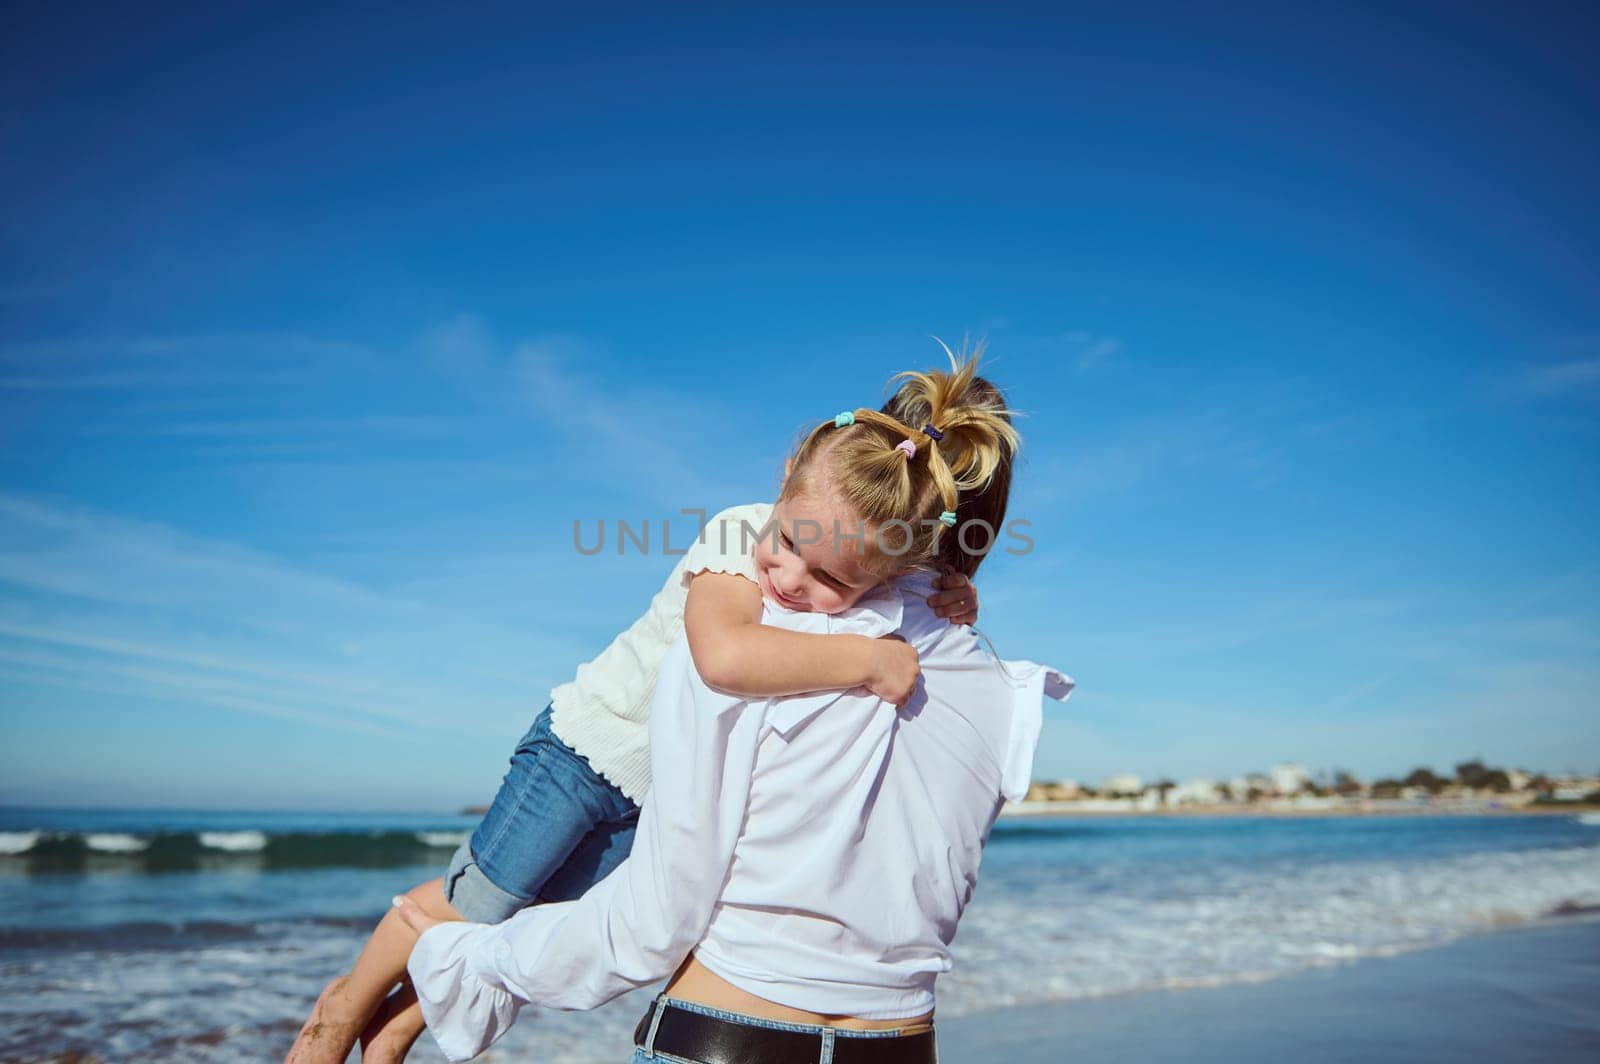 Adorable little kid girl daughter gentle hugging her mother who holds her in her arms while walking together on the sandy beach. Happy carefree childhood. Maternity leave. Family relationships concept